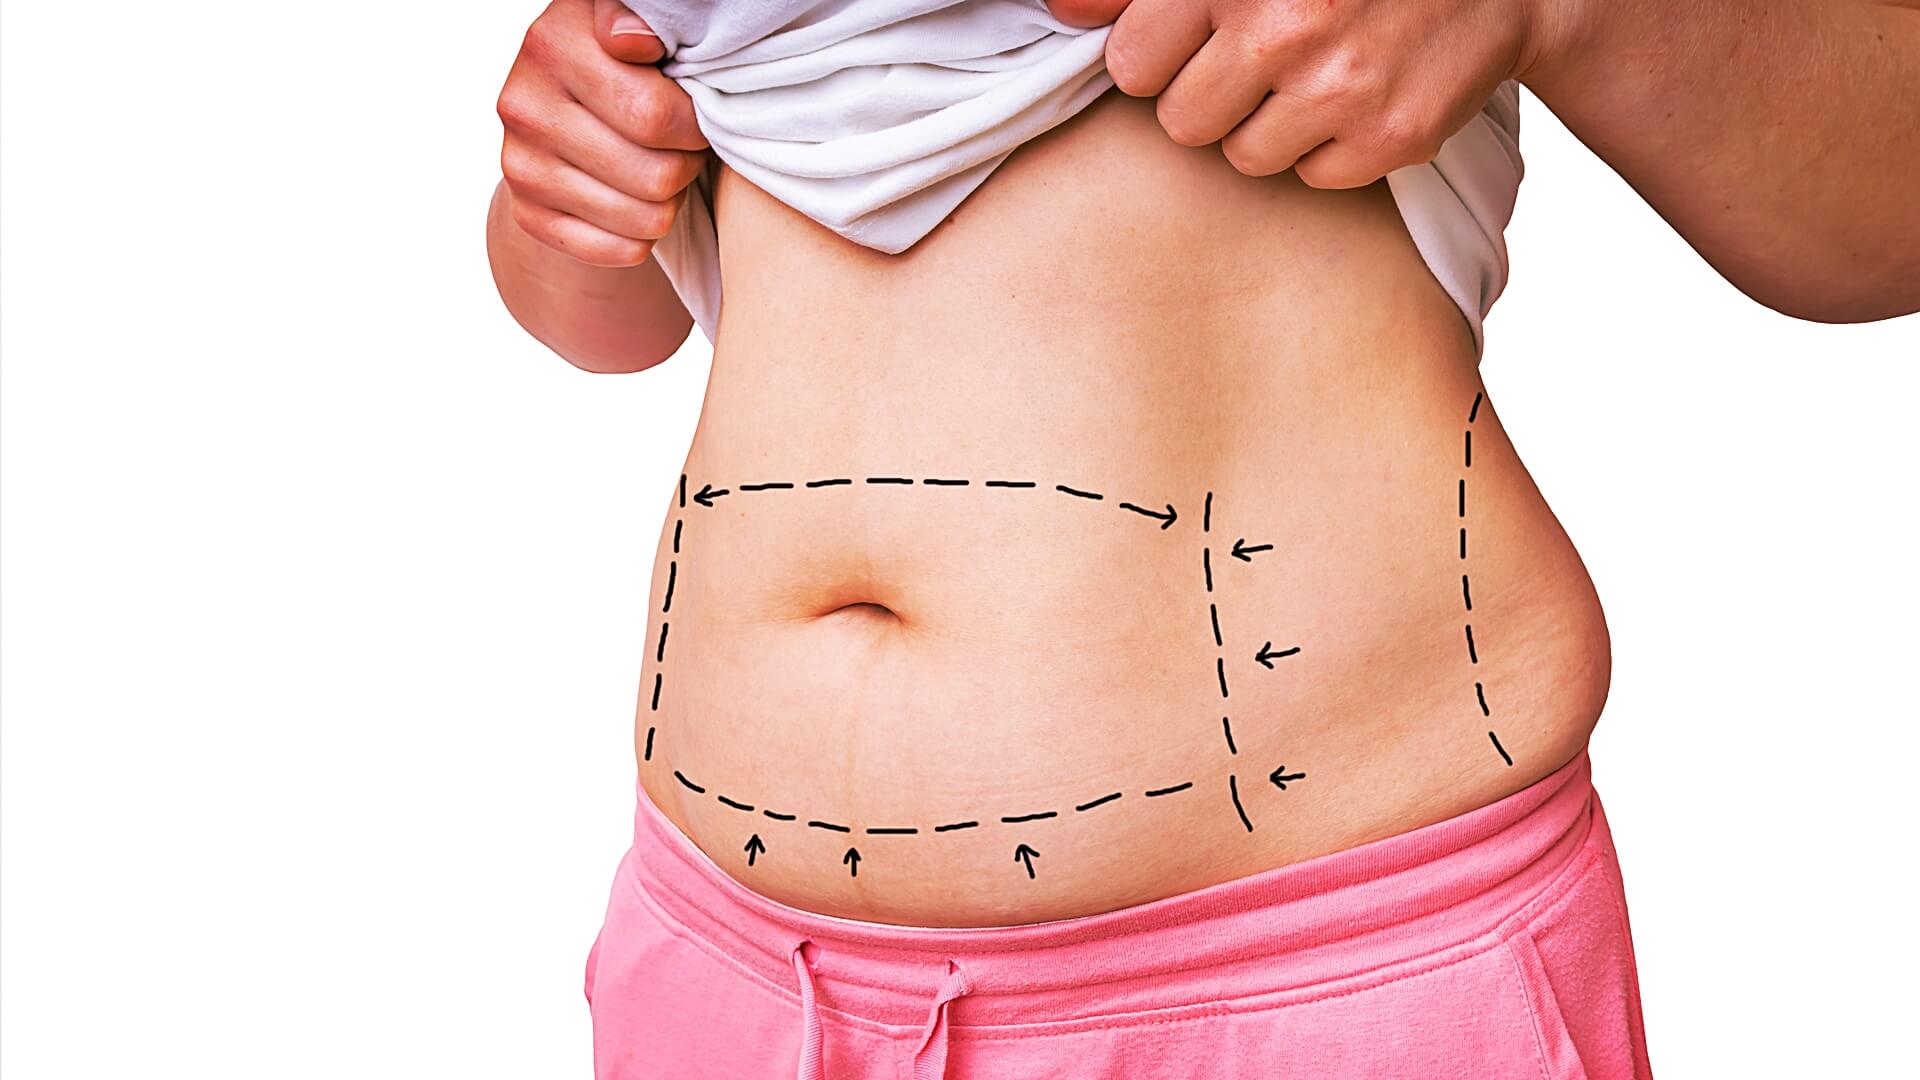 Liposuction versus liposculpture: what's the difference